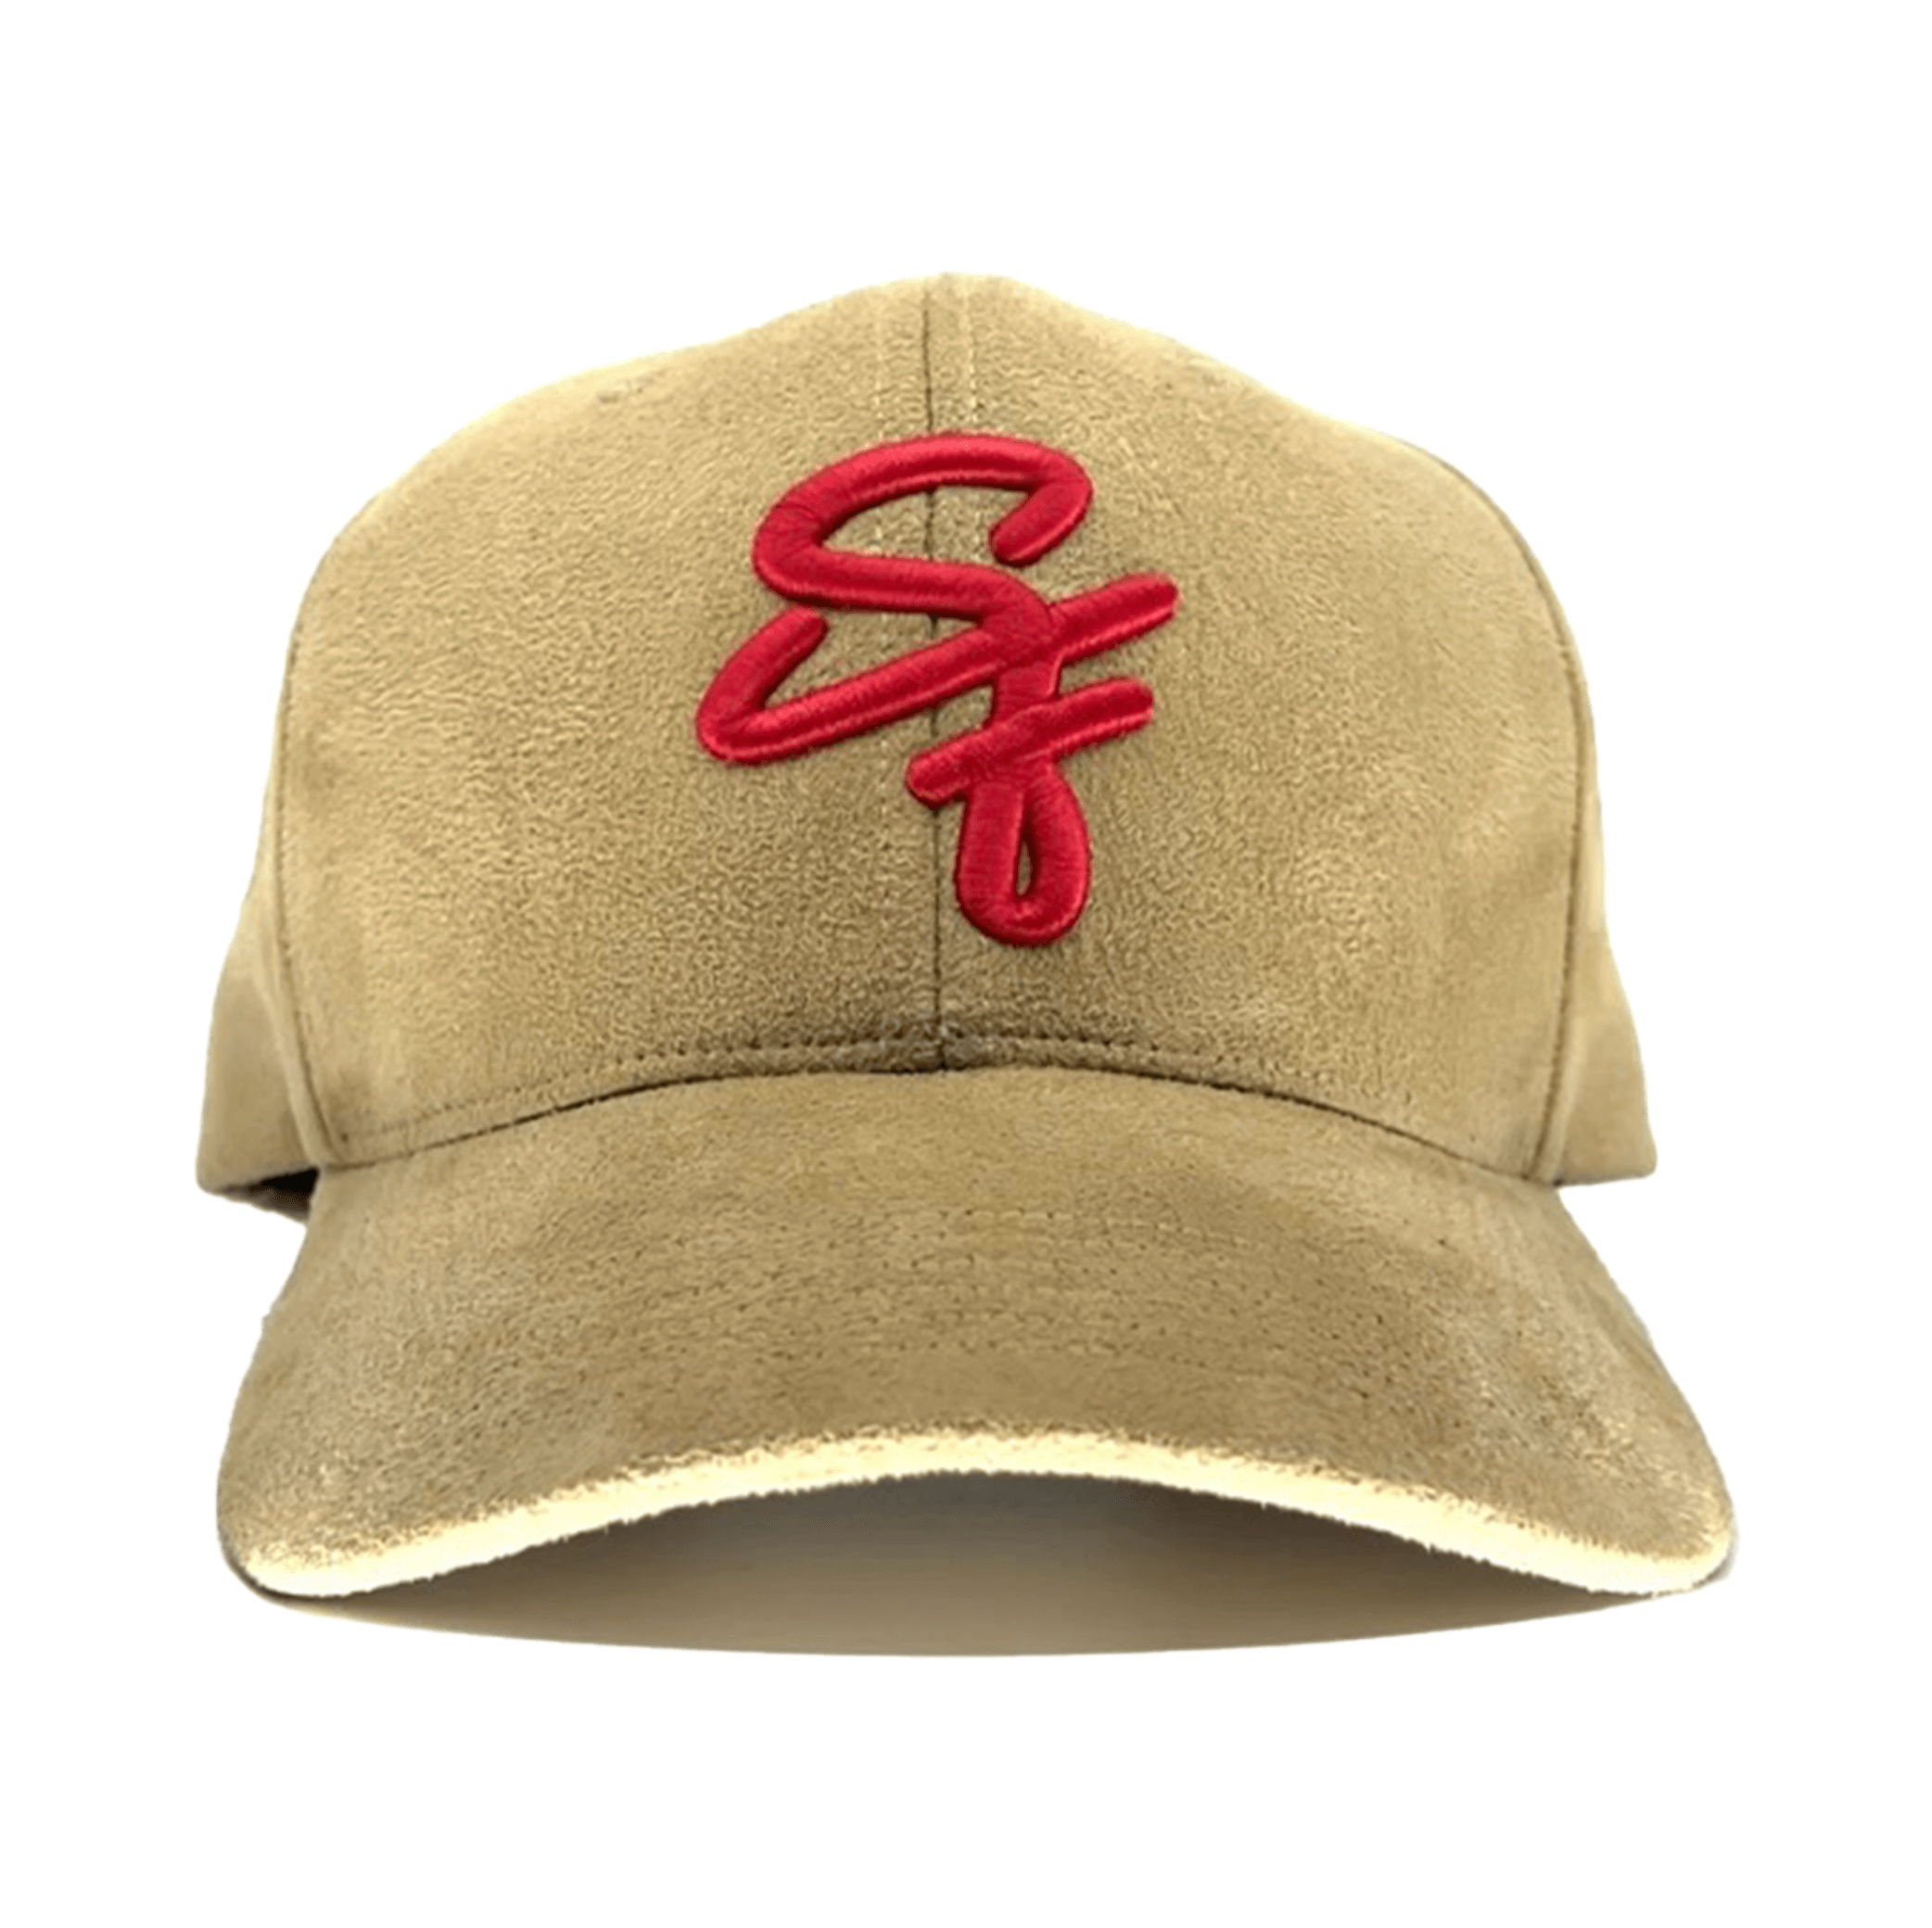 - THE CANDLESTICK SUEDE -